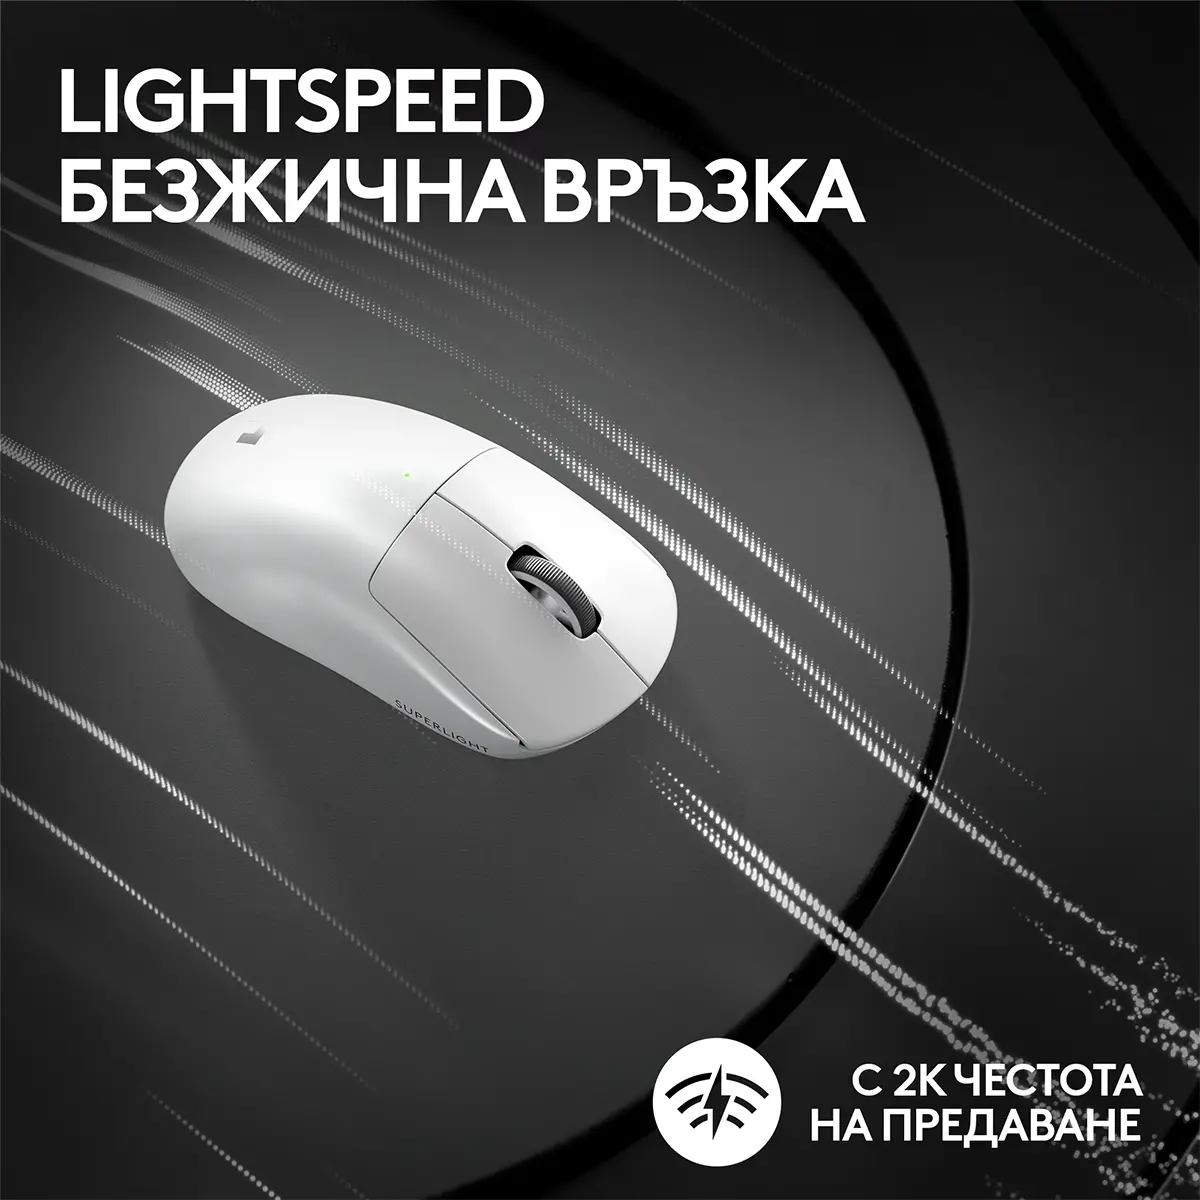 Мишка, Logitech G PRO X SUPERLIGHT 2 LIGHTSPEED Gaming Mouse - WHITE - 2.4GHZ - N/A - EER2-933 - #933 - image 3